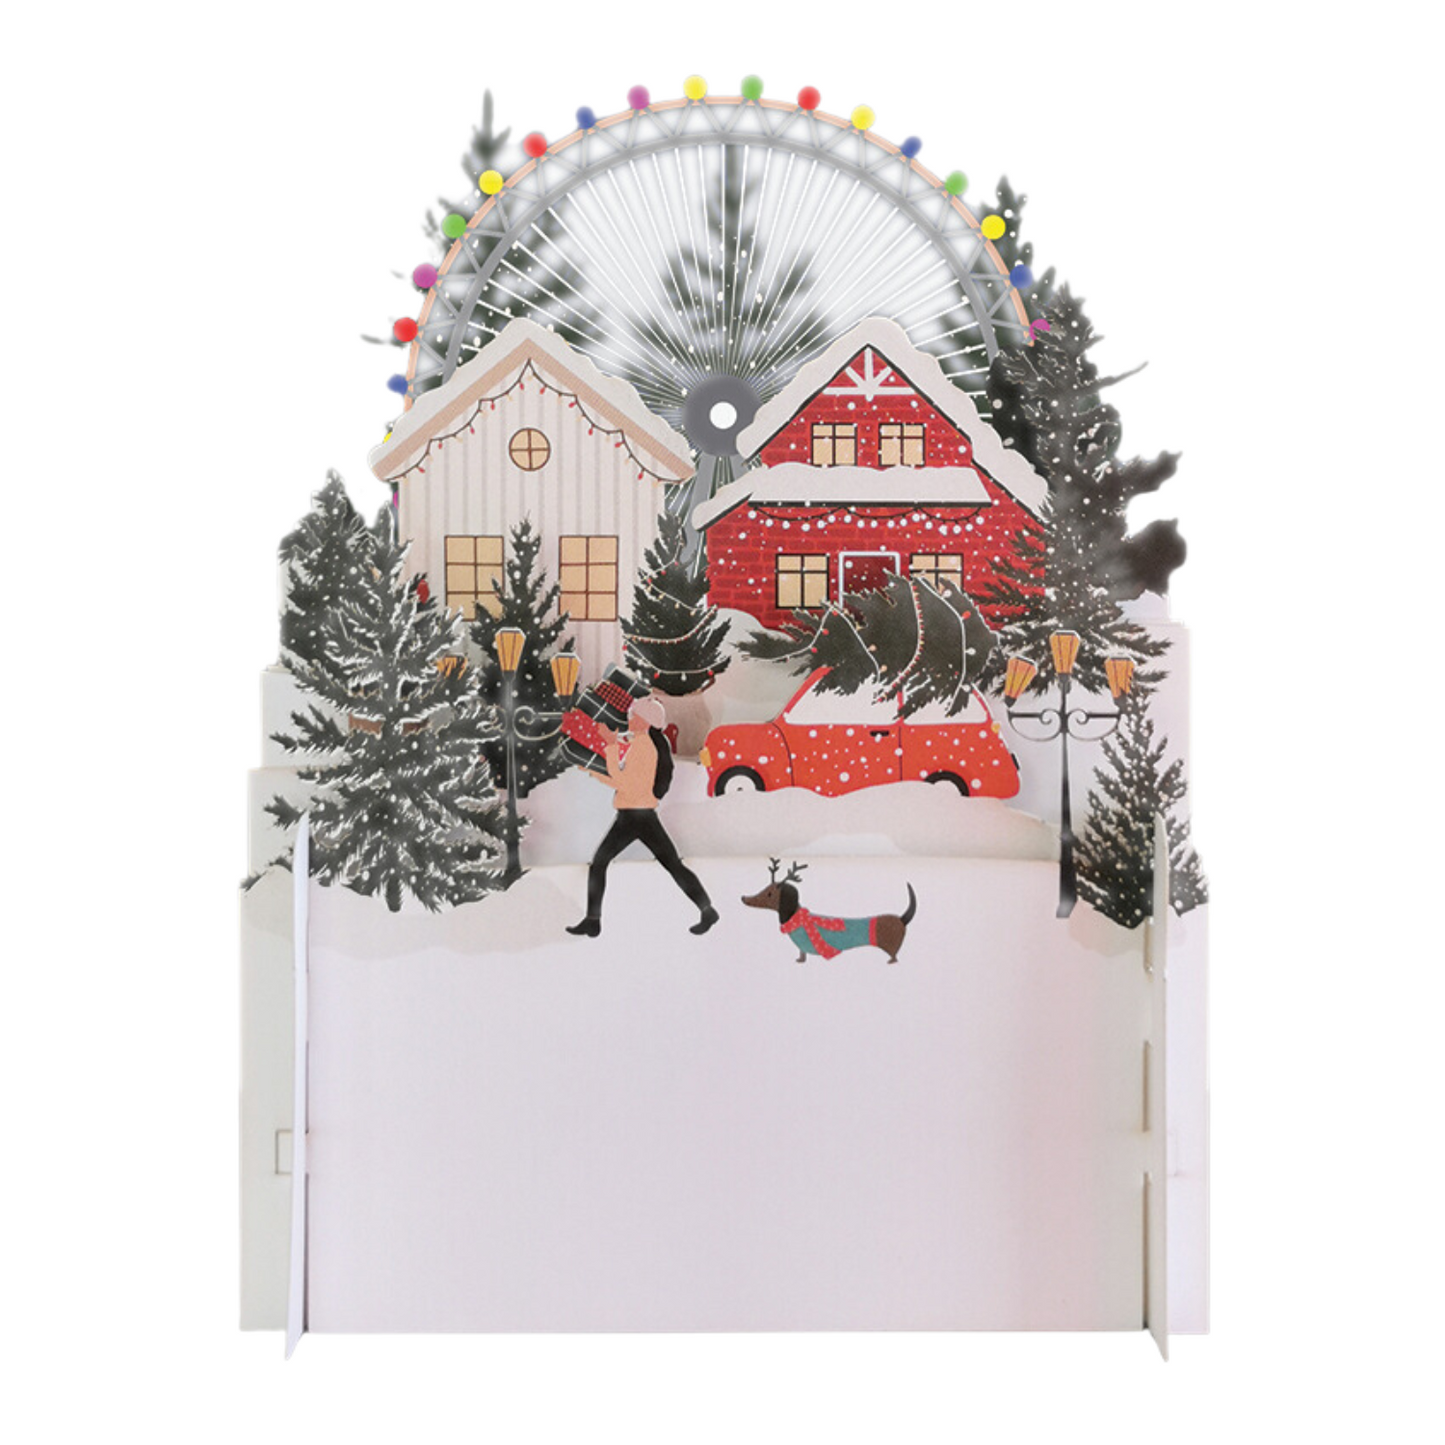 Festive Xmas Dog Delivery 3D Pop Up Christmas Greeting Card